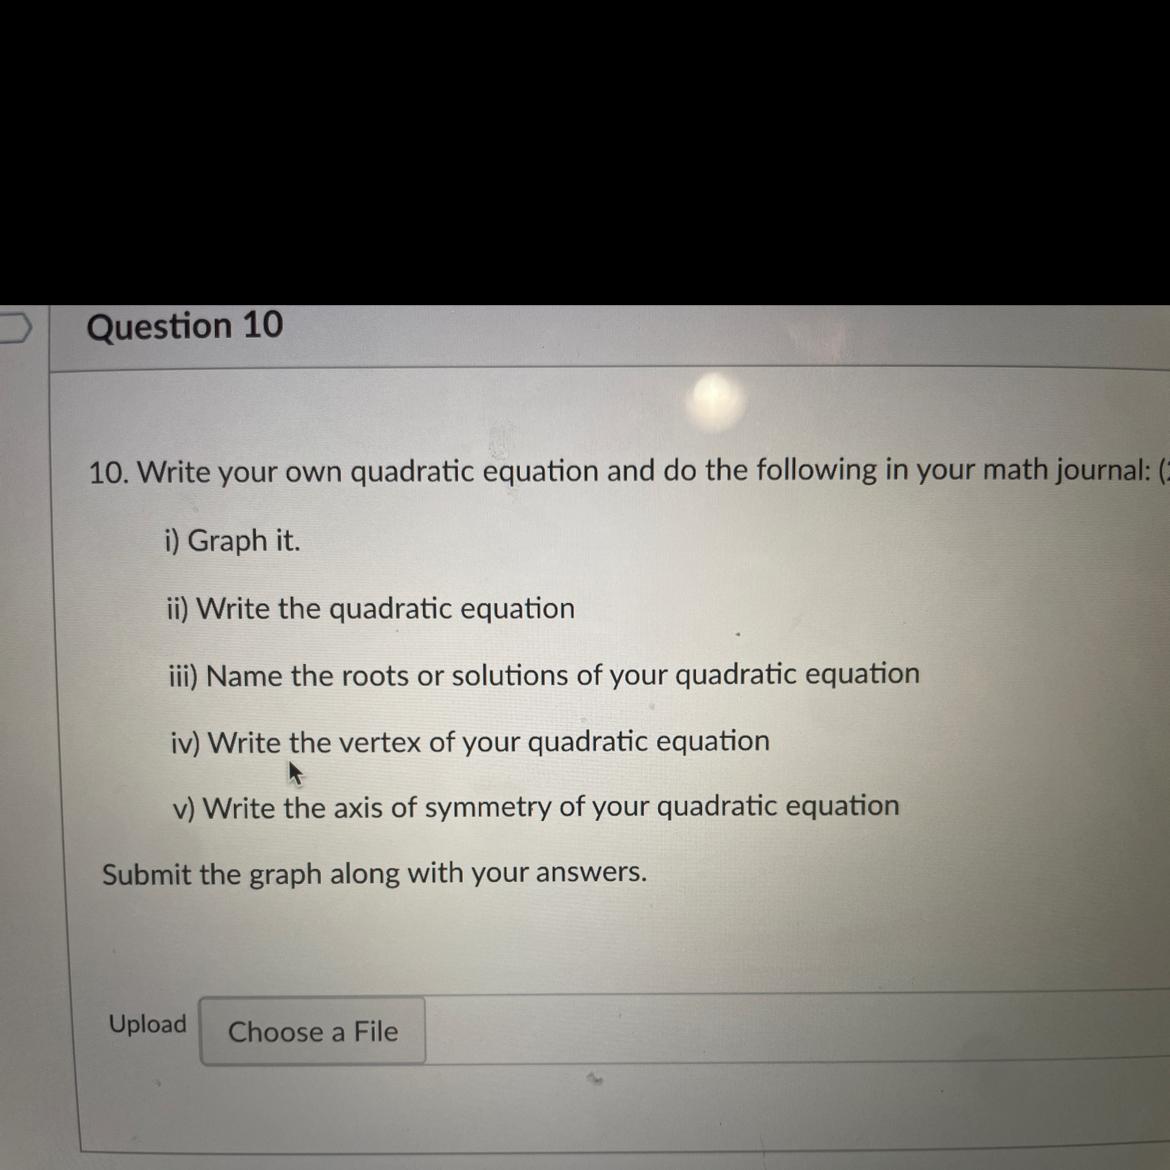 I Need Help With This Questions Please. This Is Non Graded. 